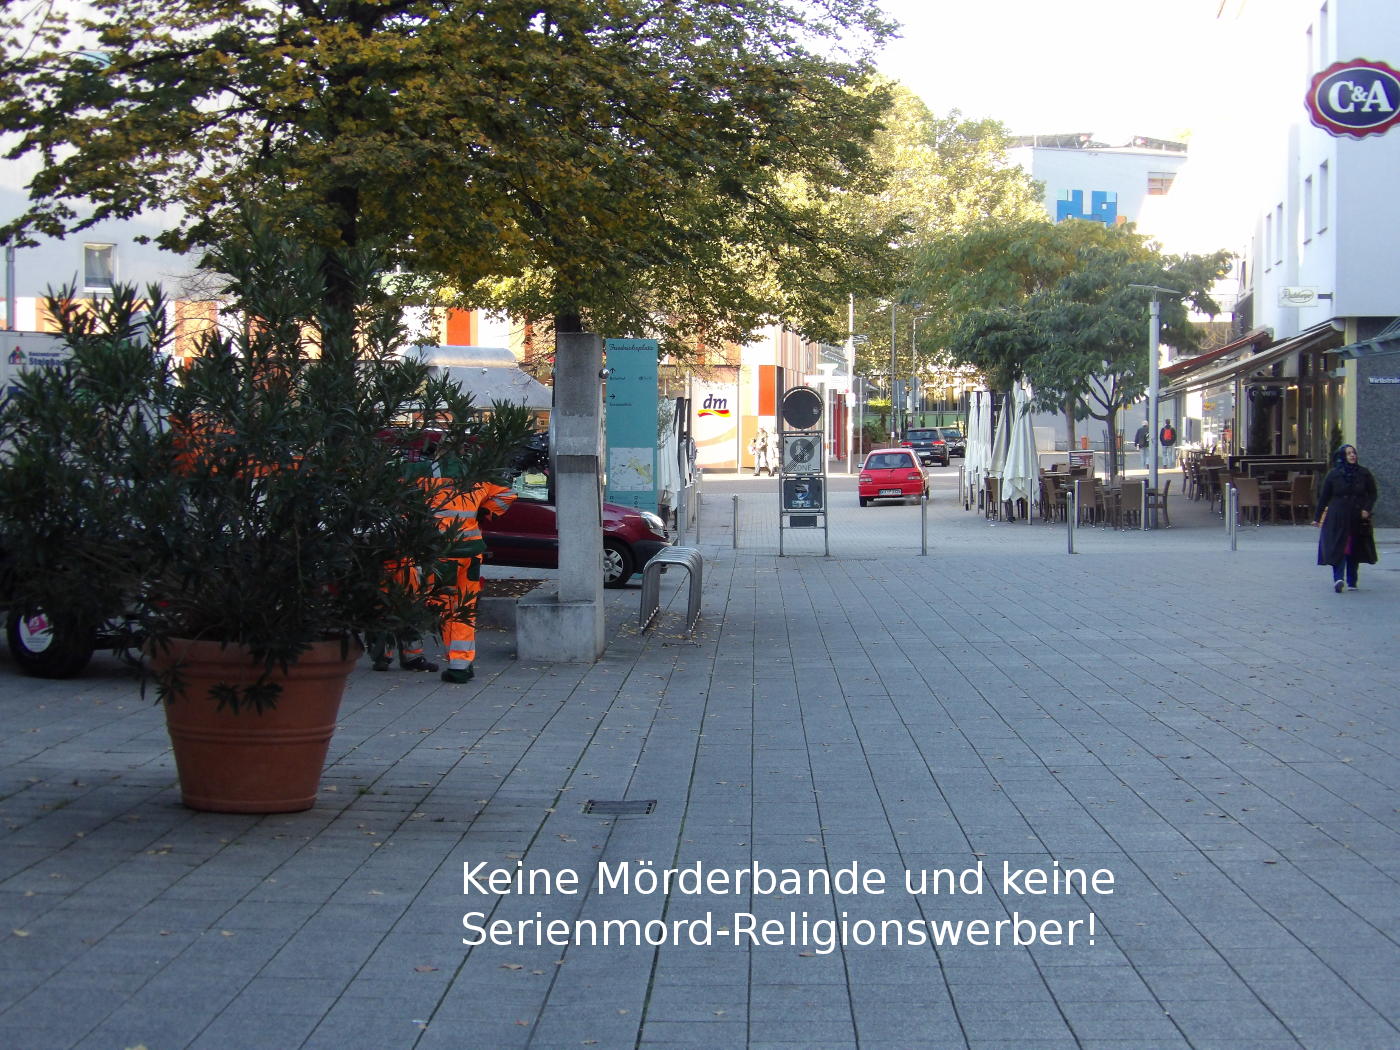 Thanks to the Bruchsal Jehovah's Witnesses!